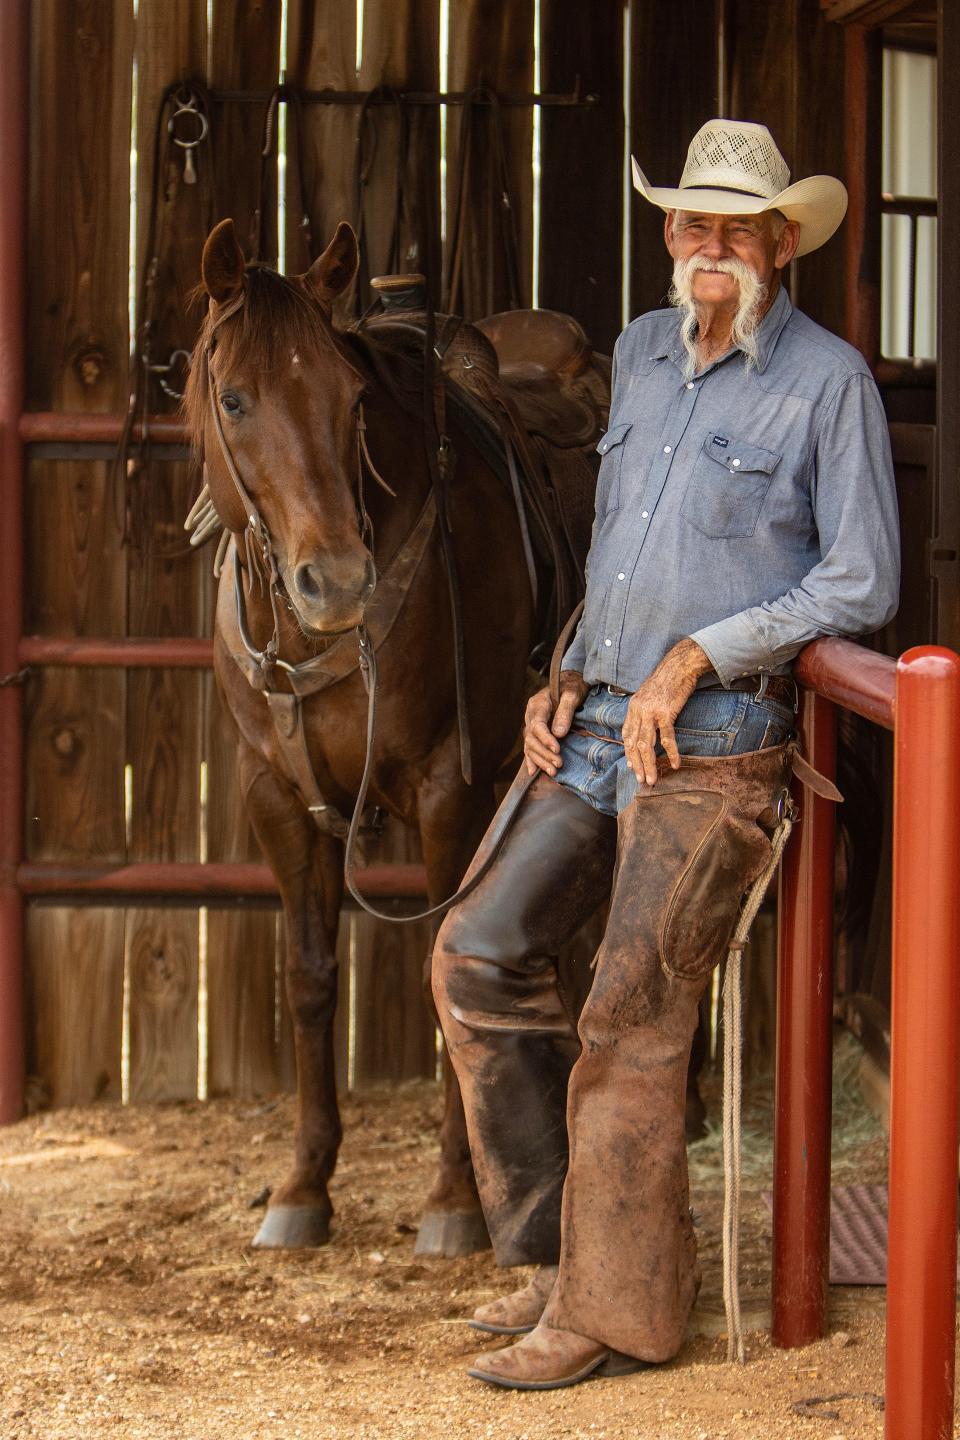 Jimbo Humphreys, ranch manager of Guitar Ranches, will receive the Ranching Heritage Association Working Cowboy Award. Established in 2018, the award recognizes men and women who make their living in the saddle taking care of livestock and land daily.